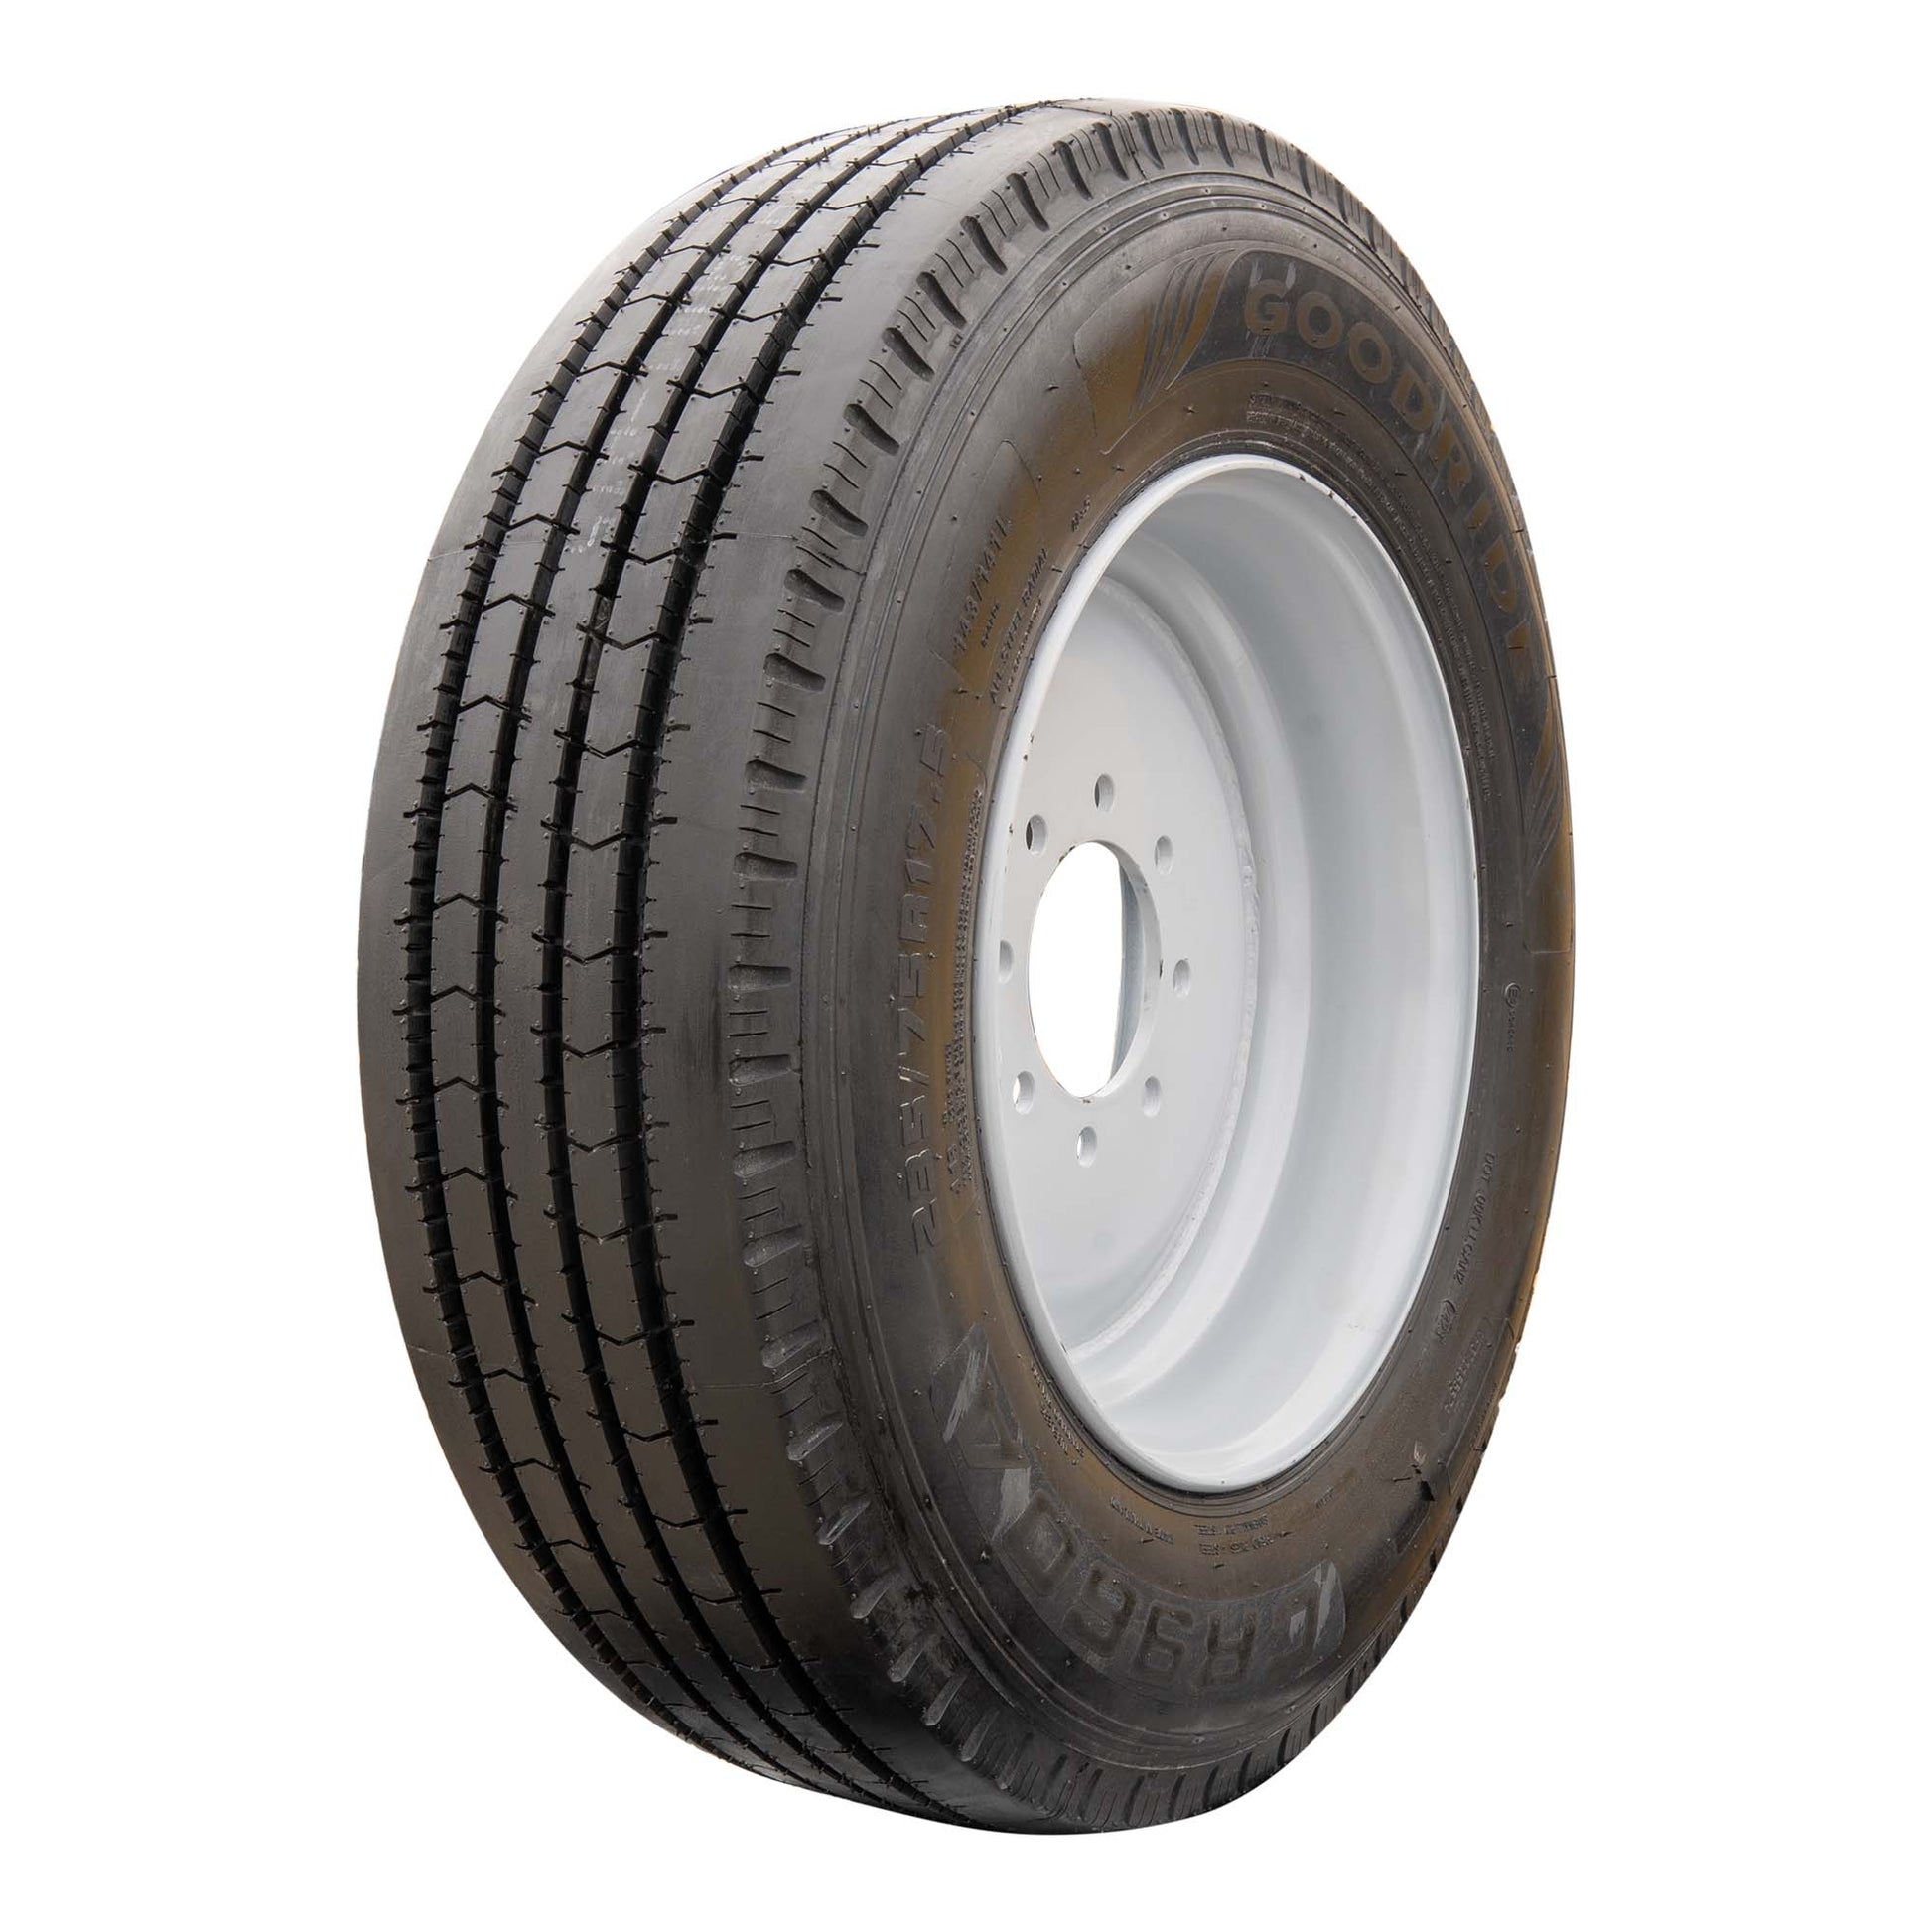 Goodride 17.5" 18 ply Radial Trailer Tire & Wheel - ST 235/75R17.5 8 Lug (Super Single Silver Solid) - The Trailer Parts Outlet